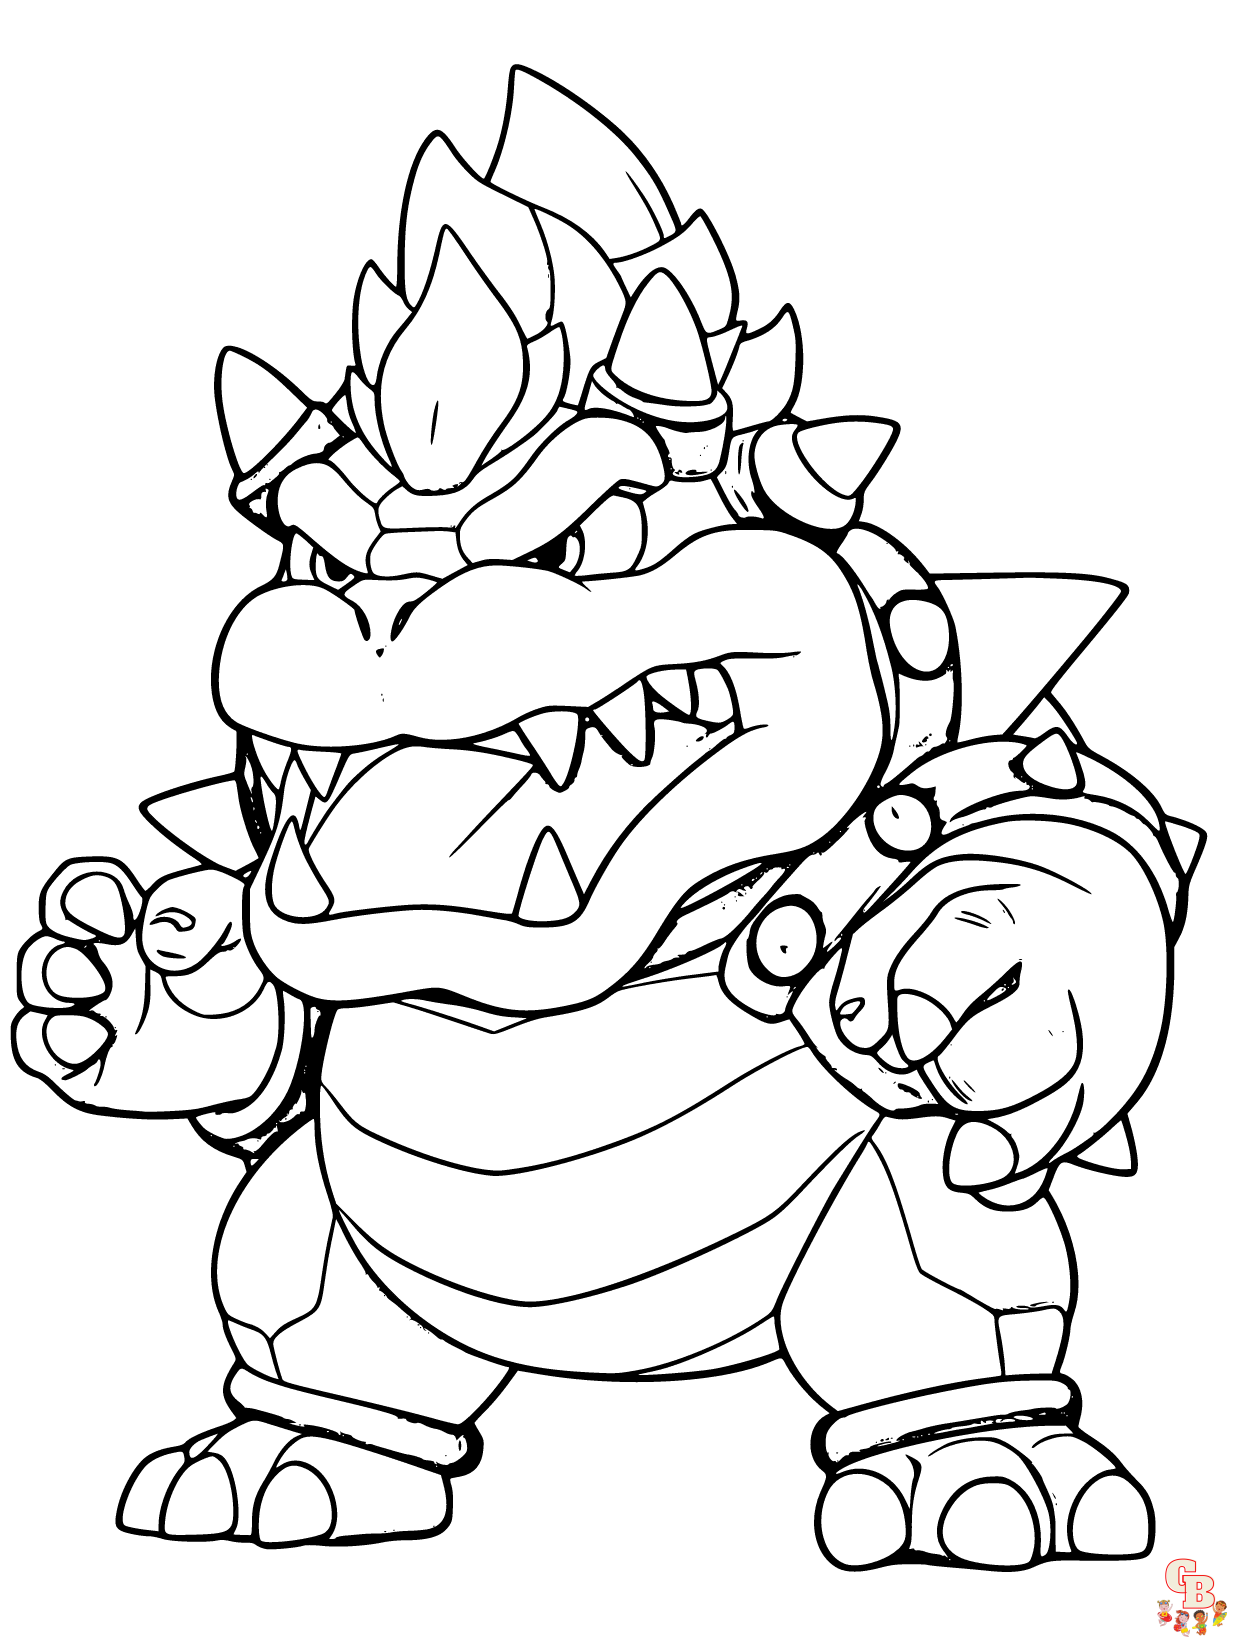 Bowser coloring pages printable free